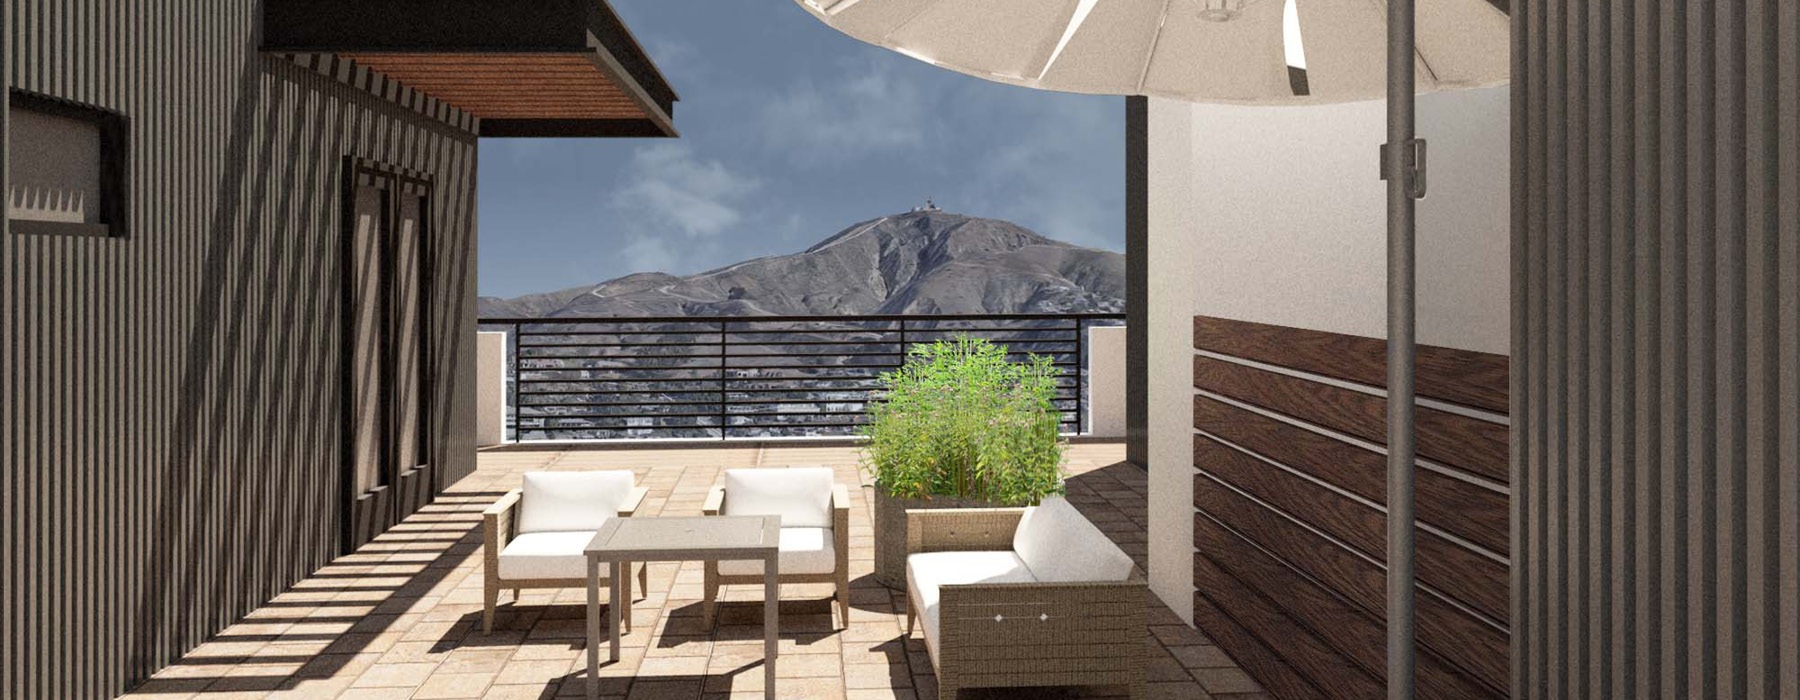 rendering of an outdoor rooftop with mountain views